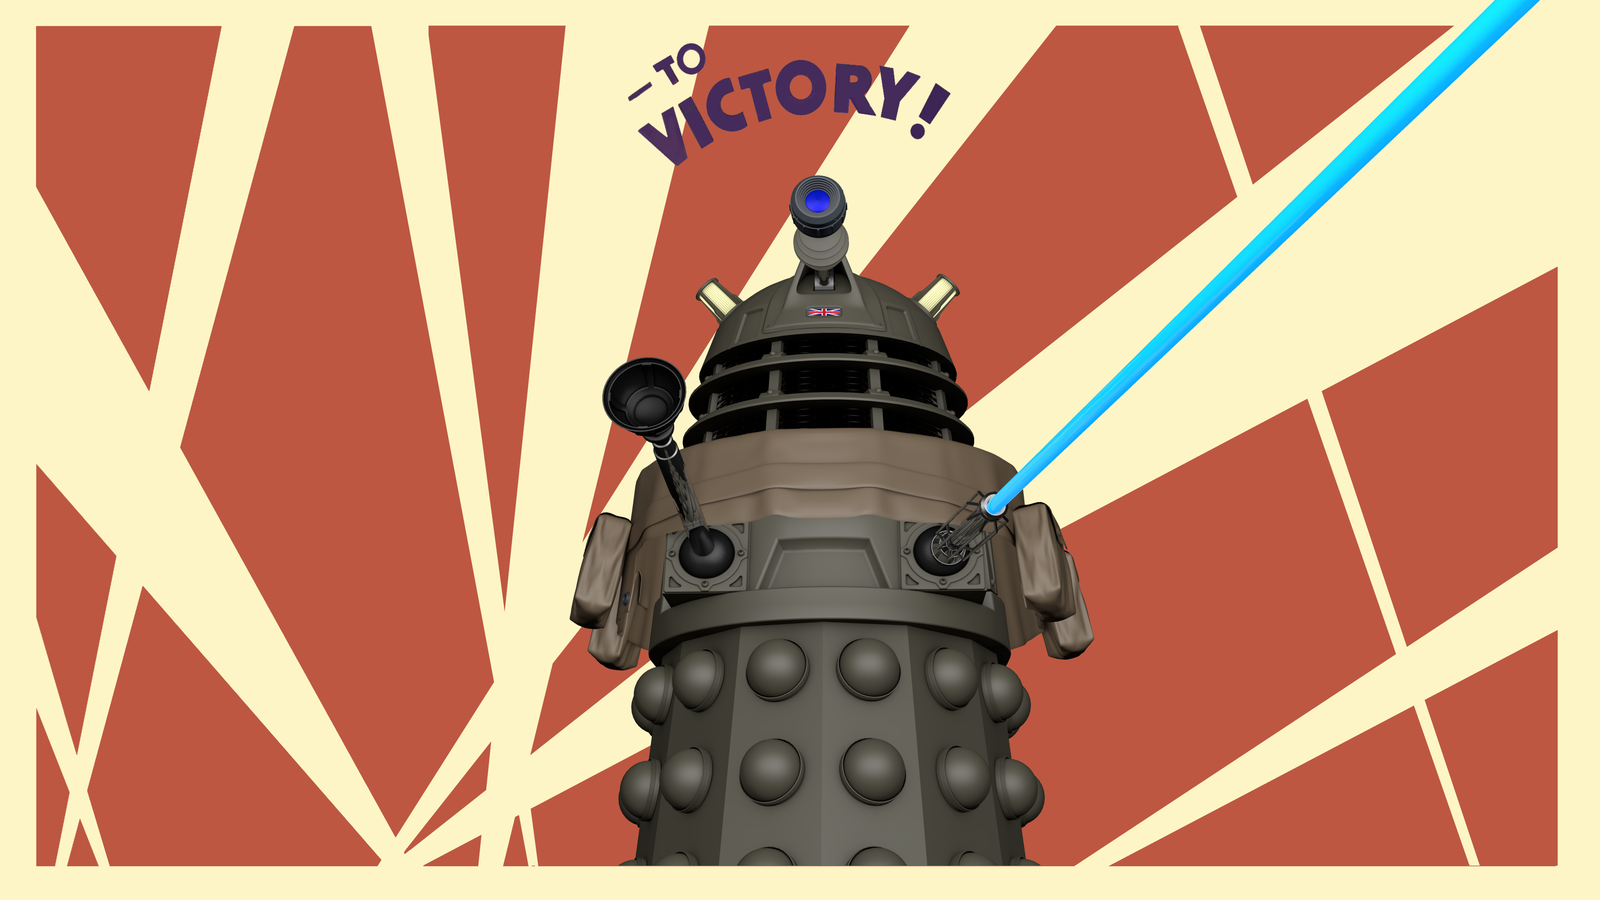 3d To Victory Ironside Dalek Poster By One Broken Dream On